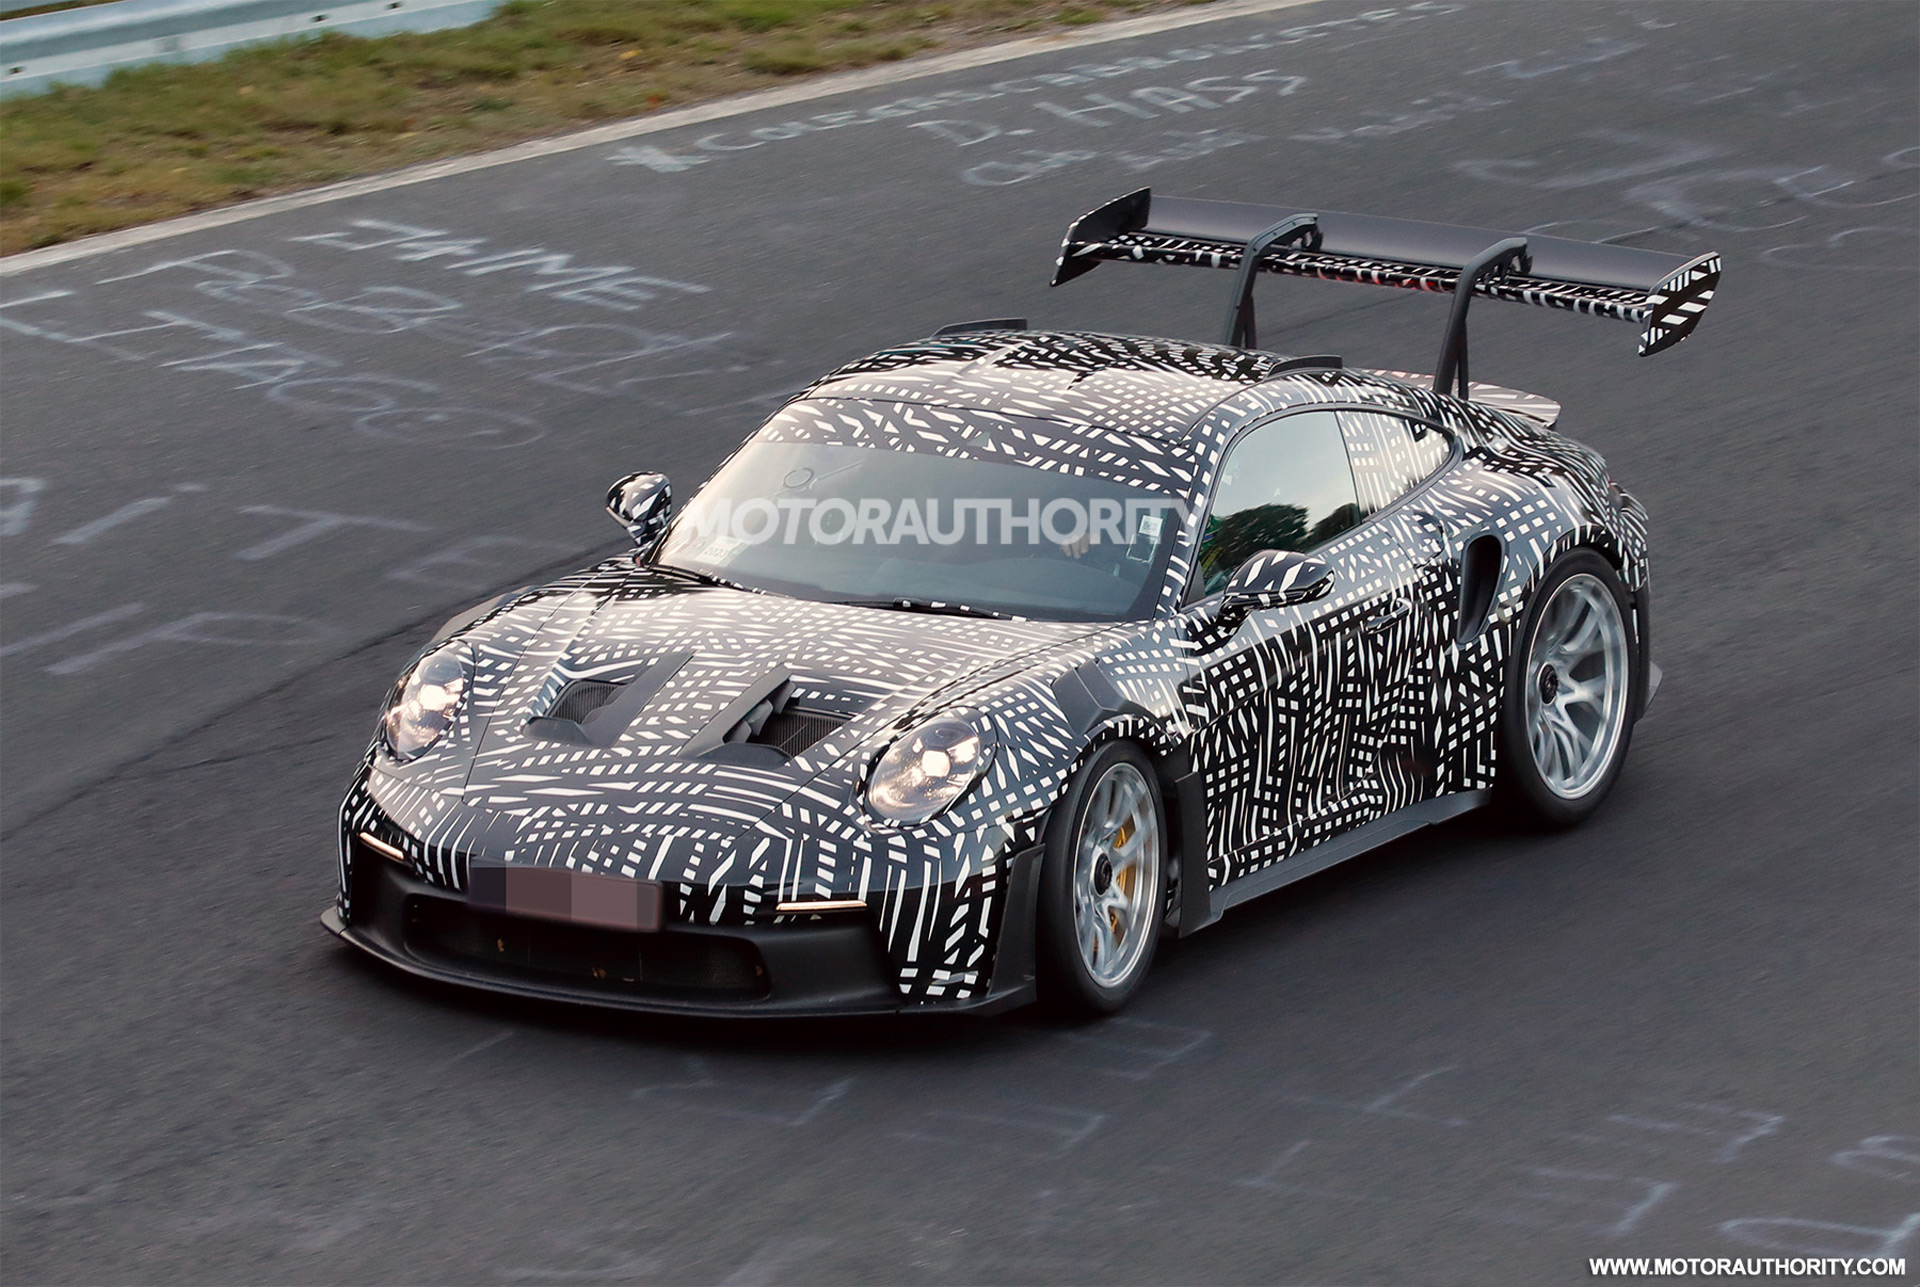 Porsche 911 GT3 RS MR, Keanu Reeves’ F1 documentary: Today’s Car News Auto Recent